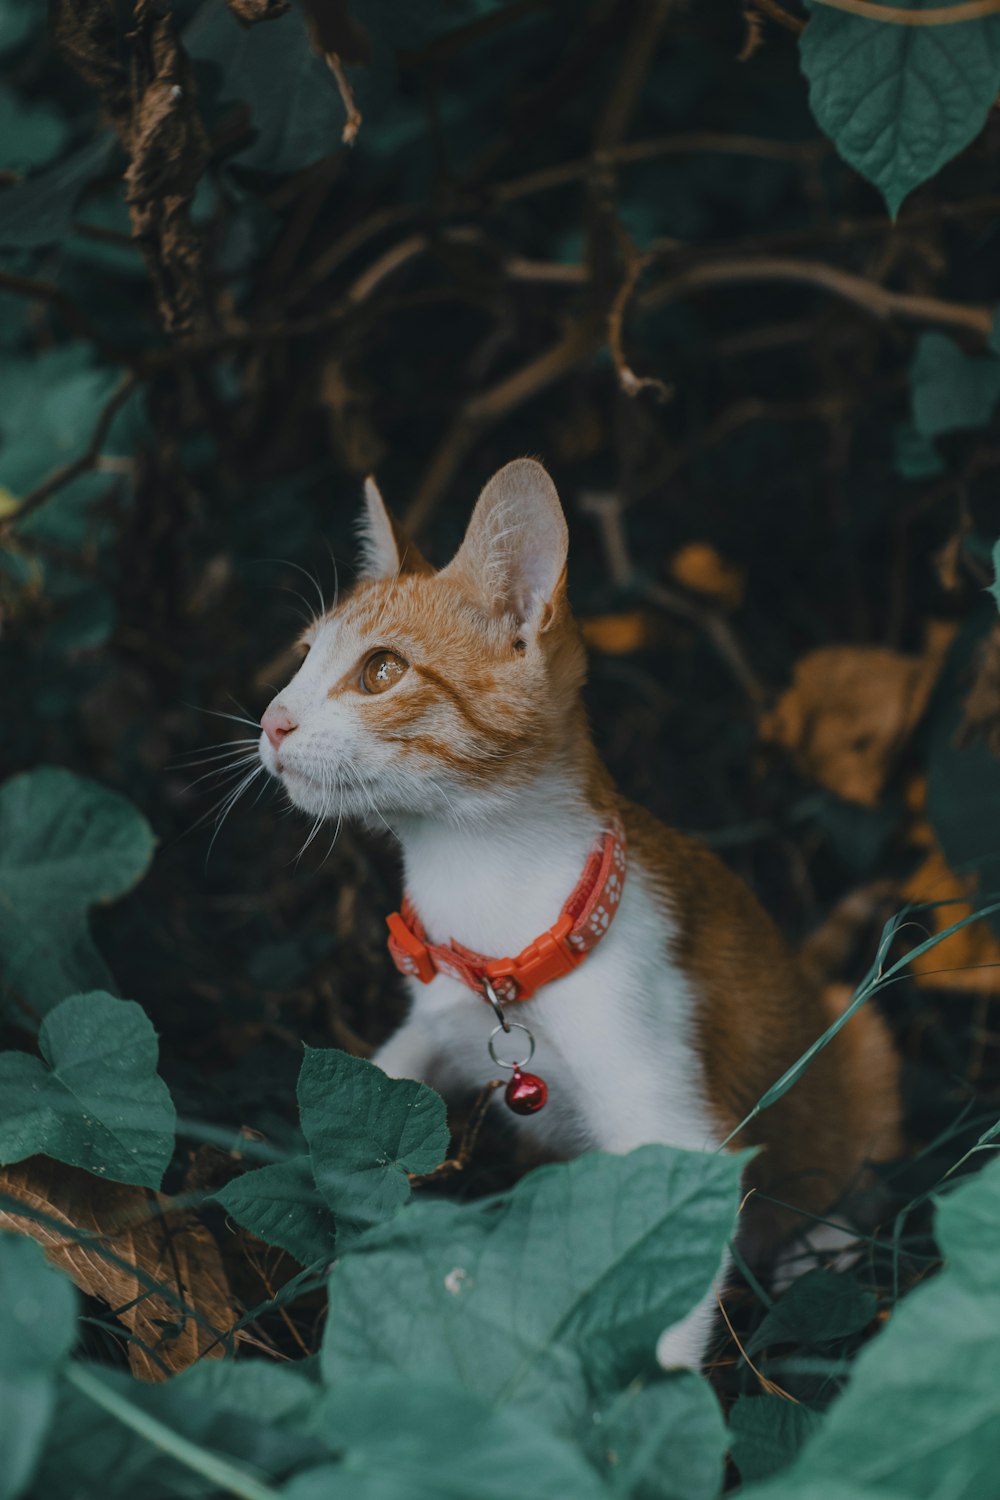 an orange and white cat wearing a red collar